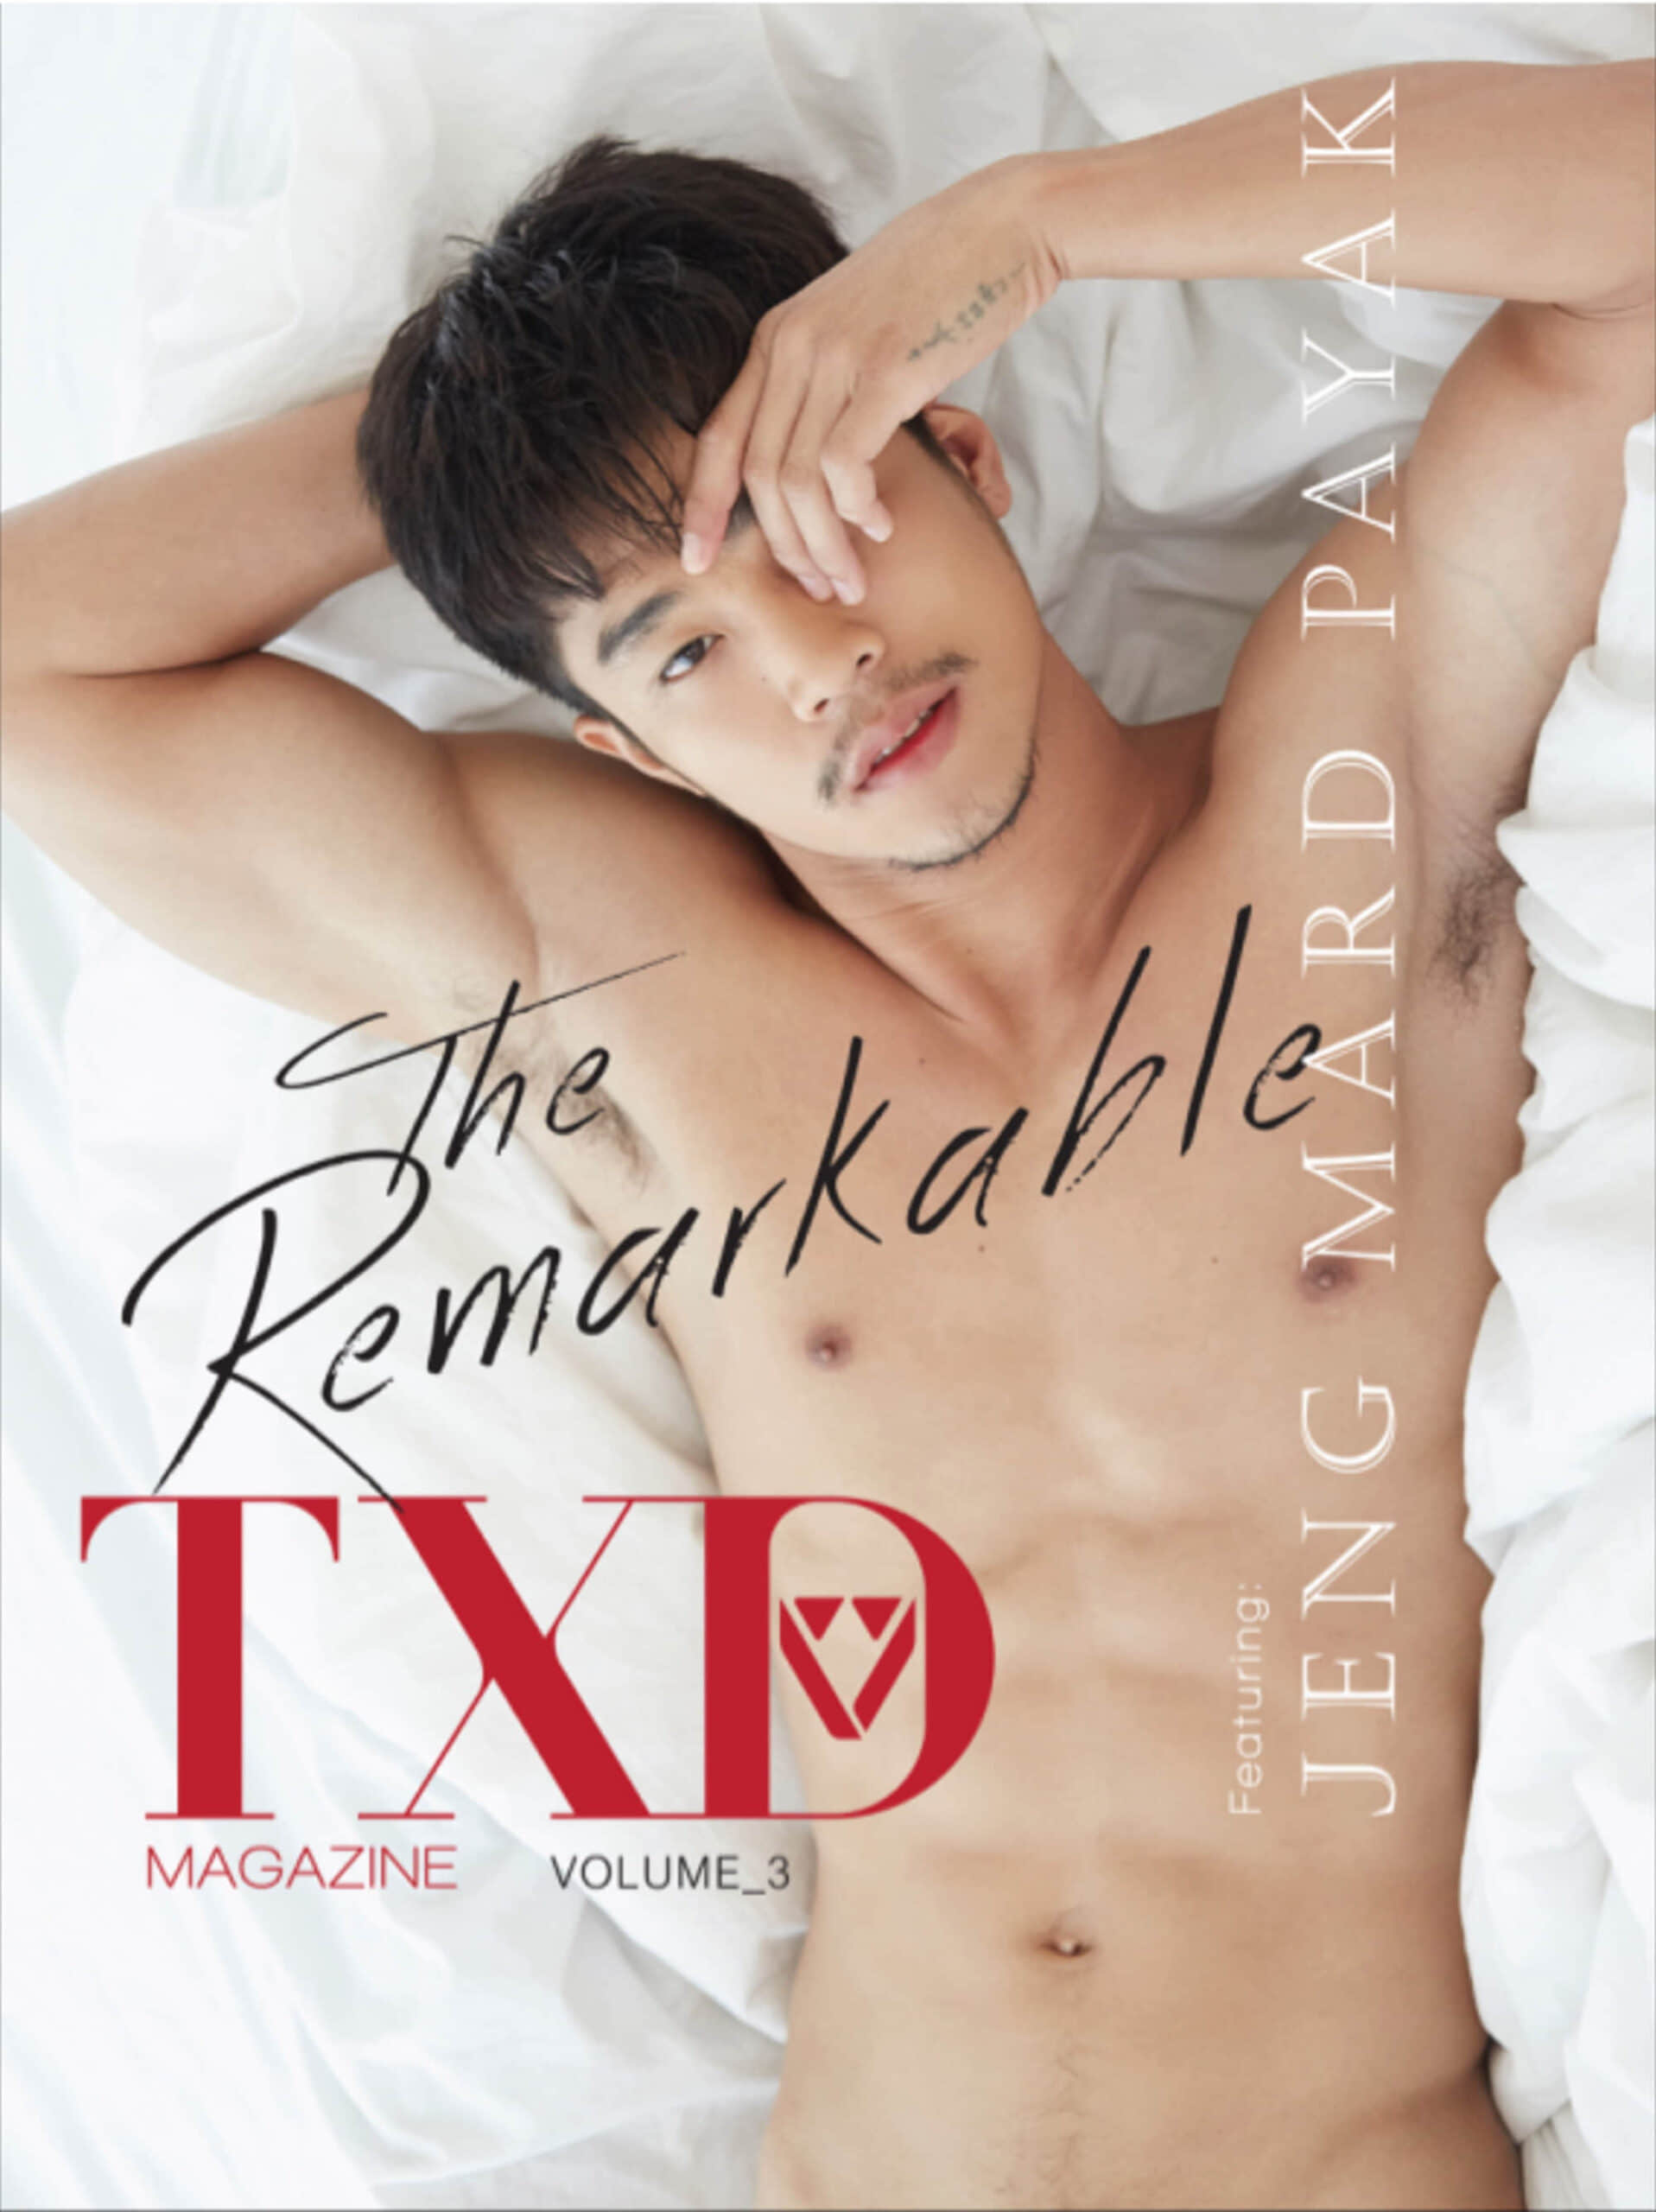 TXD 03 | The Remarkable-NICEGAY